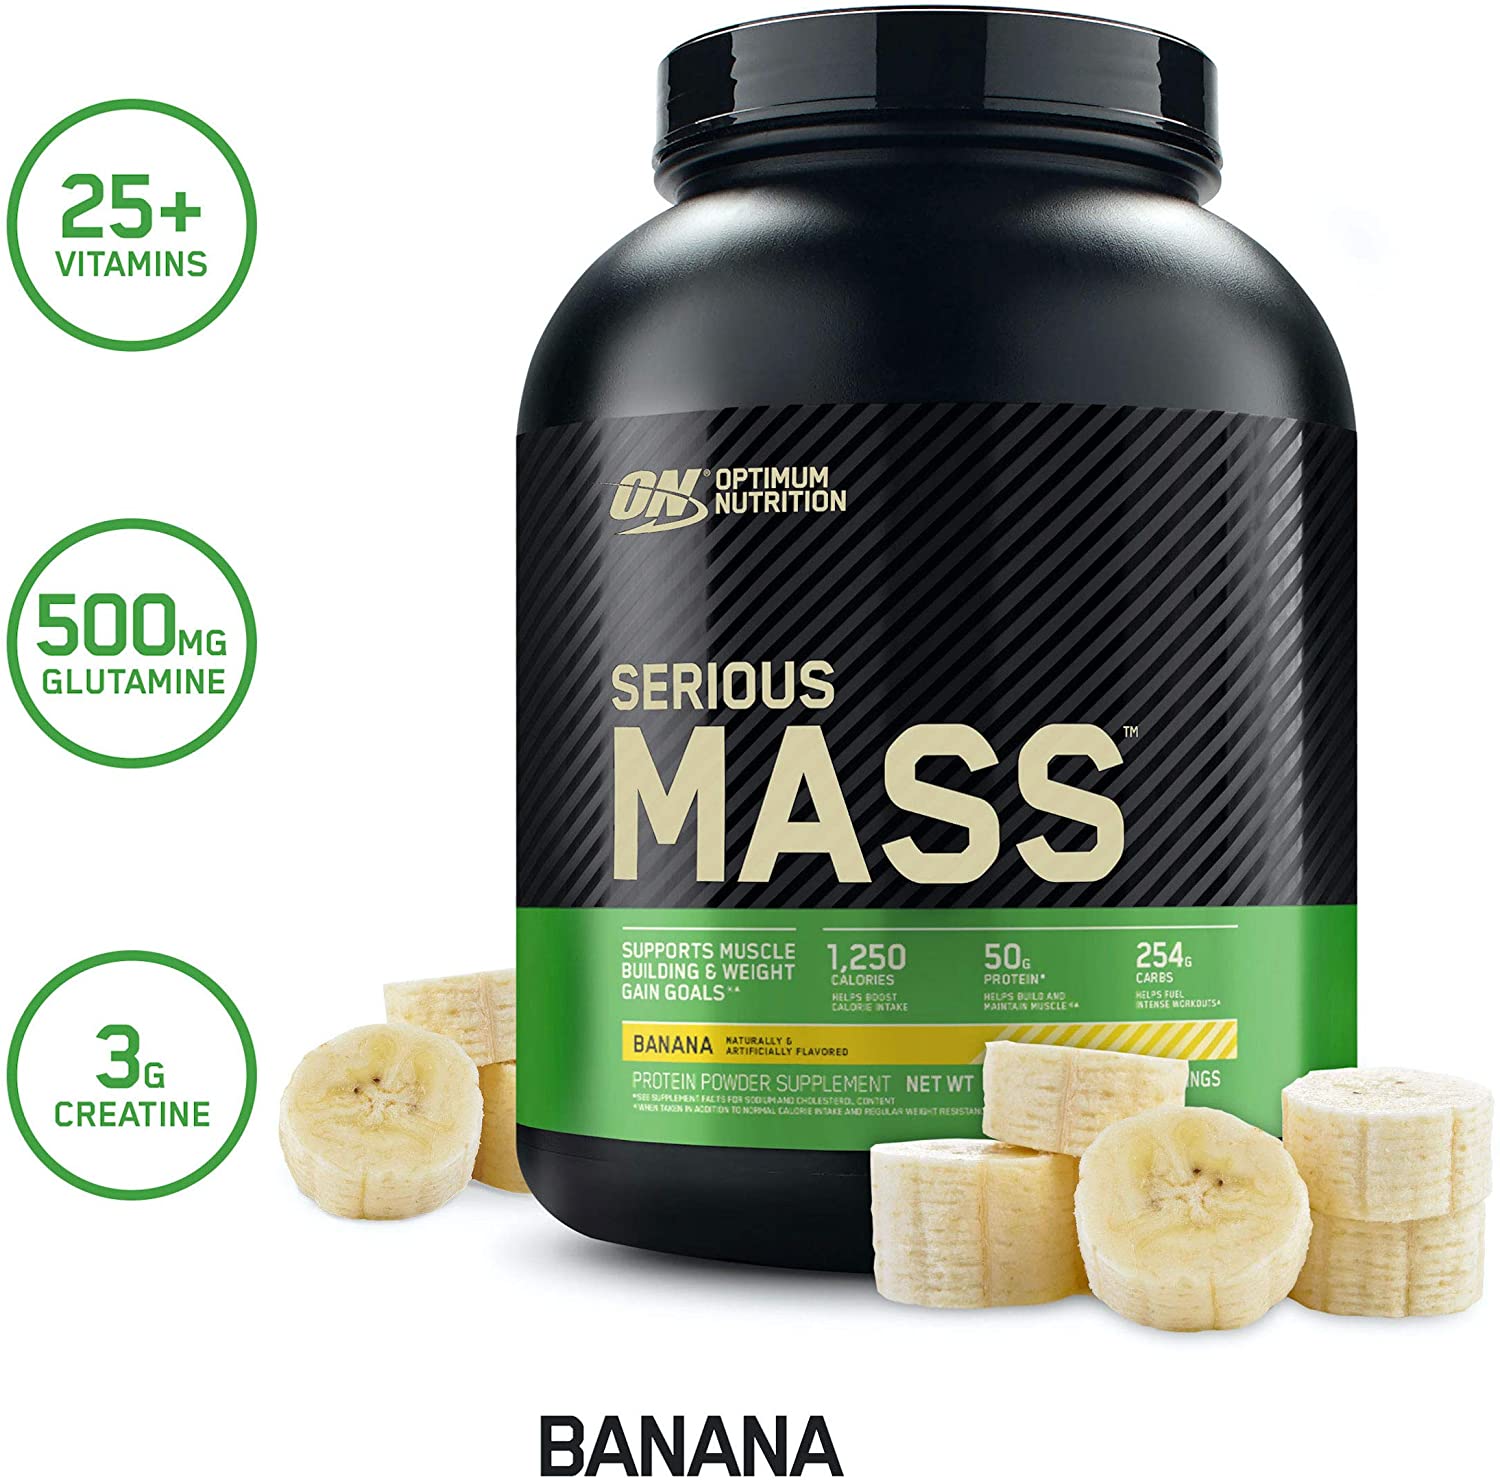 Optimum Nutrition Serious Mass, Banana, 6 lbs, 2.72 kg, 8 Serving, Supplement Contains, SNS Health, Sports Nutrition